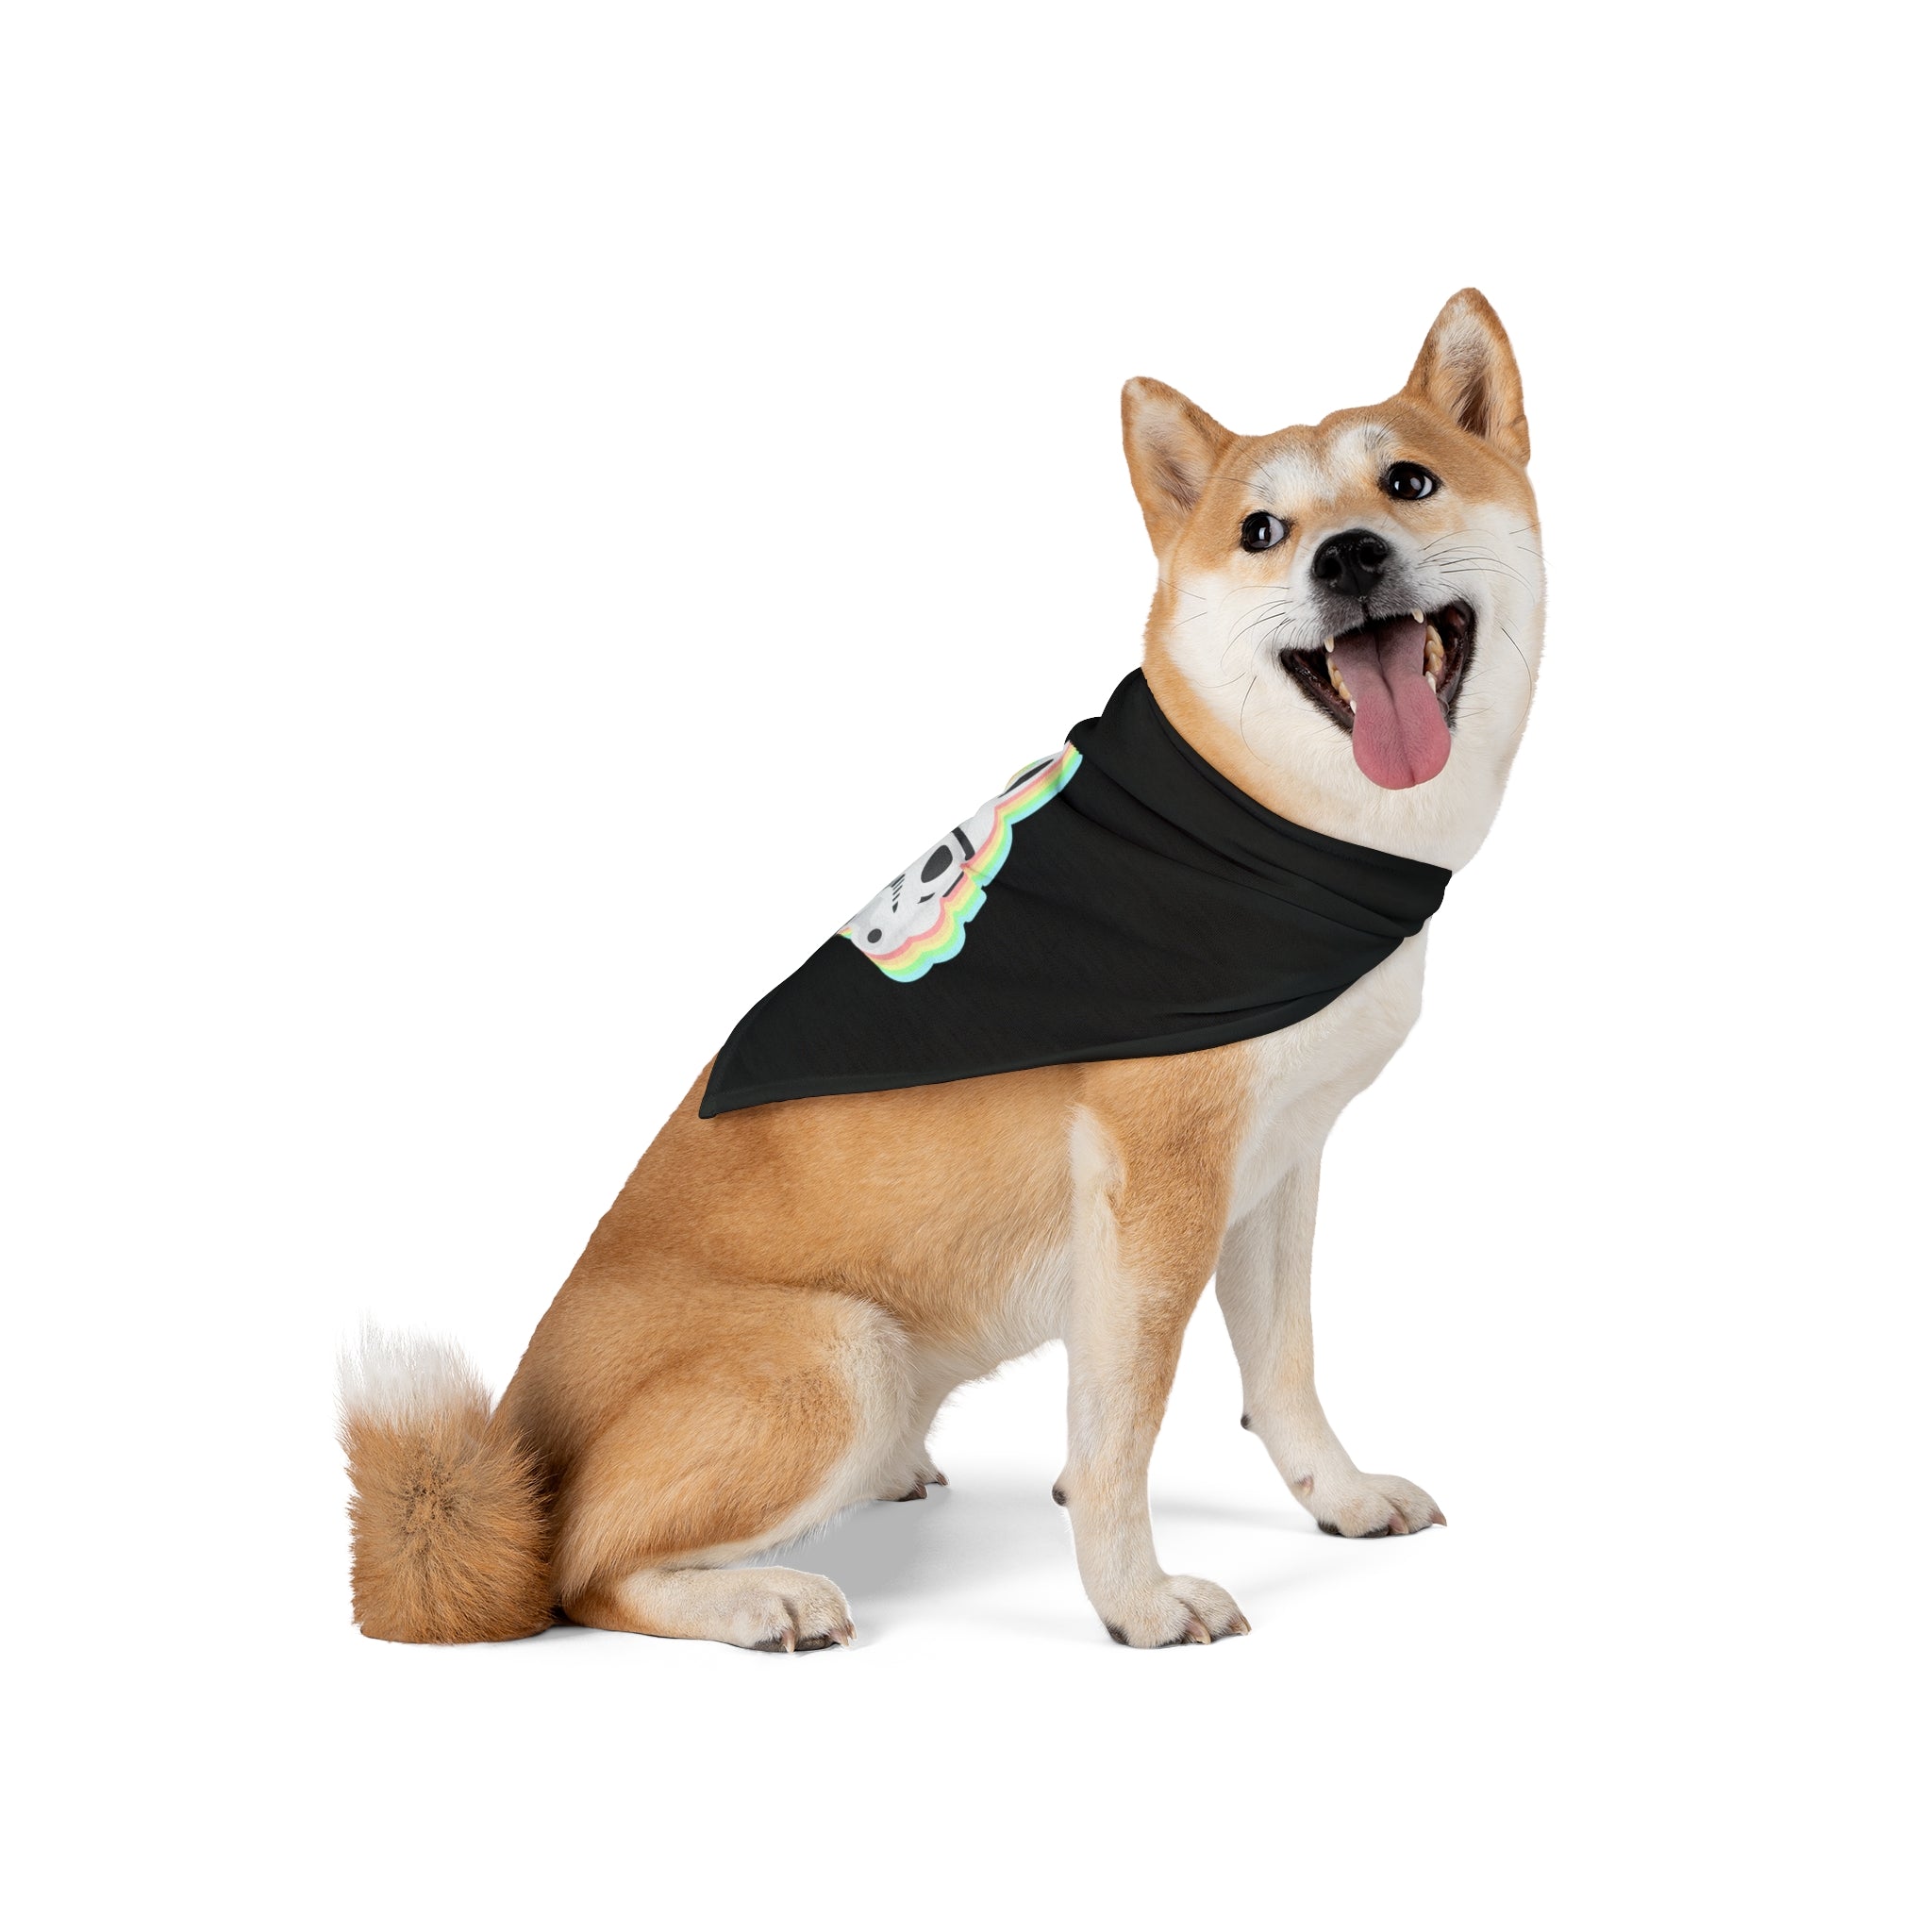 A Shiba Inu dog wearing a Star Wars Easter Stormtrooper - Pet Bandana with a colorful design, sitting with its tongue sticking out and looking slightly to the side.